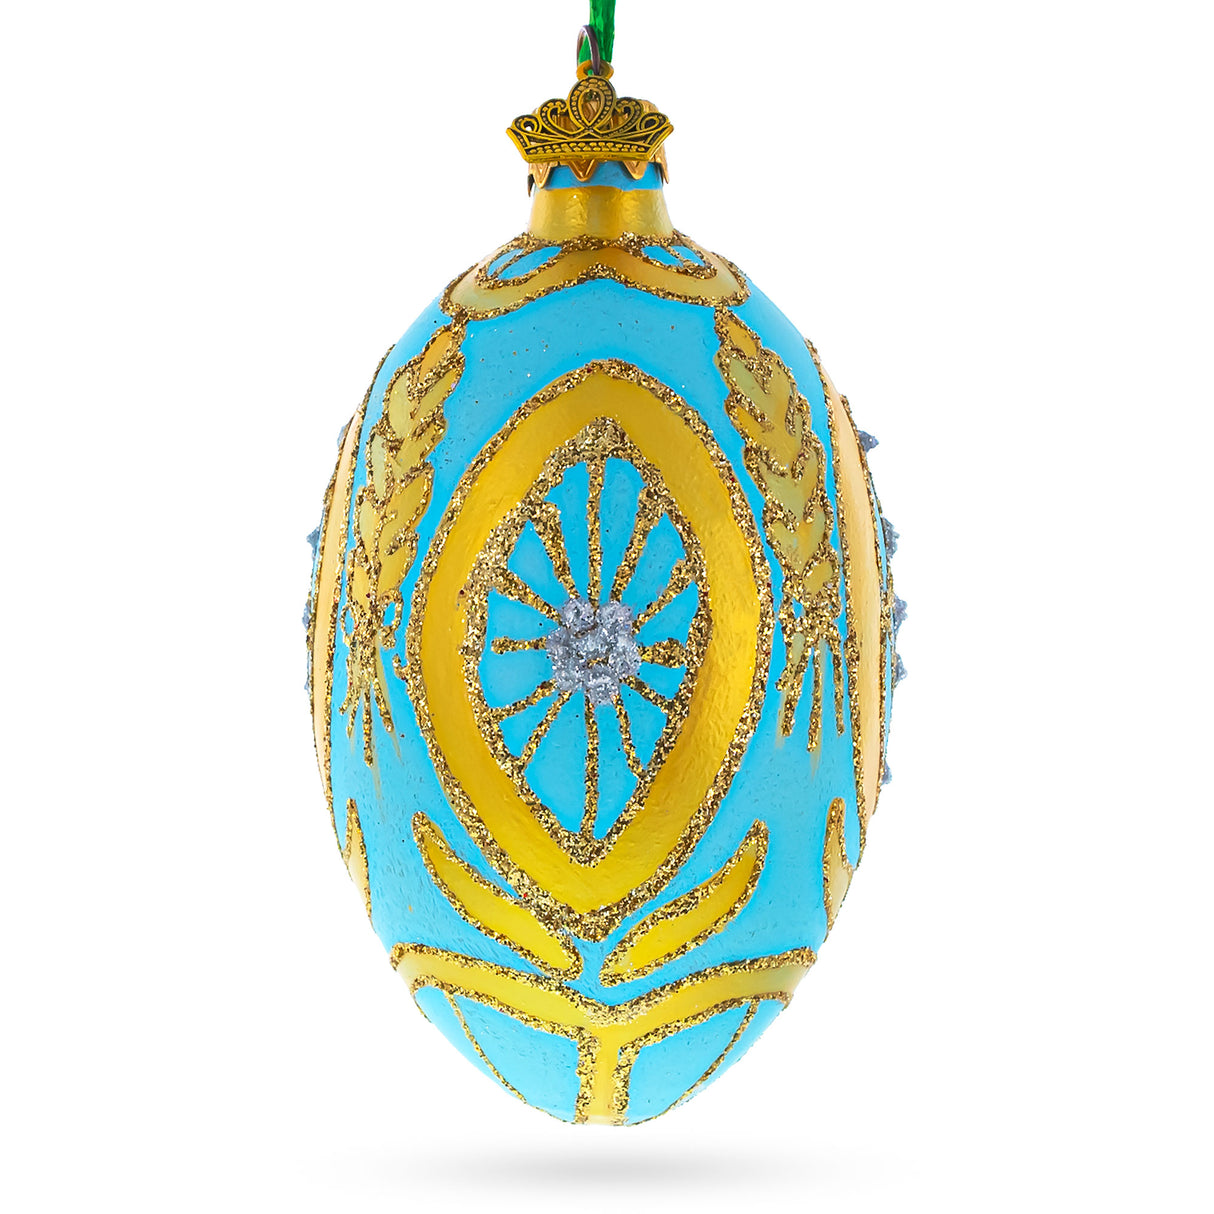 Golden Wheat on Turquoise Glass Egg Christmas Ornament 4 Inches in Blue color, Oval shape